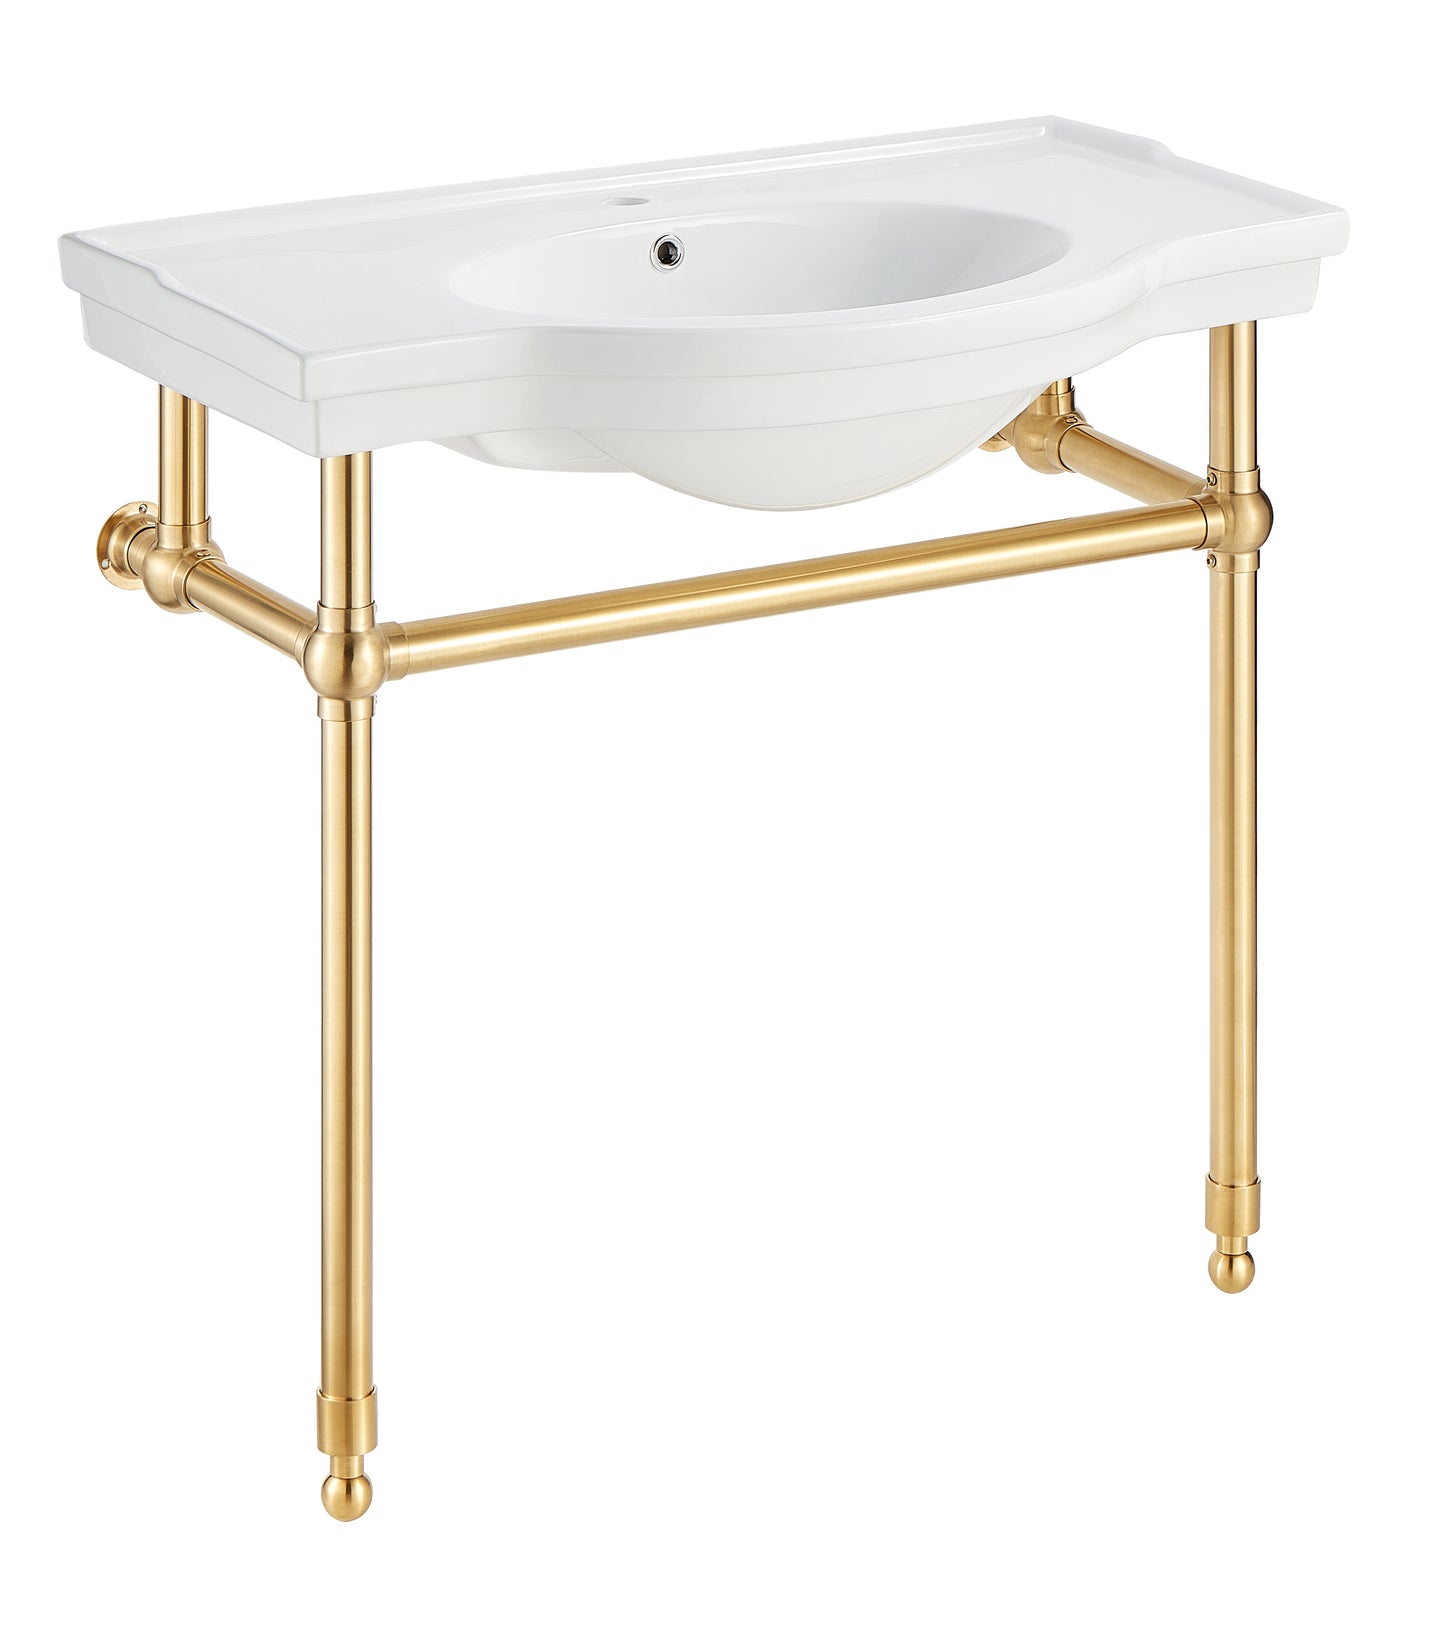 CS-FGC003-BG - Viola 34.5 in. Console Sink in Brushed Gold with Ceramic Counter Top